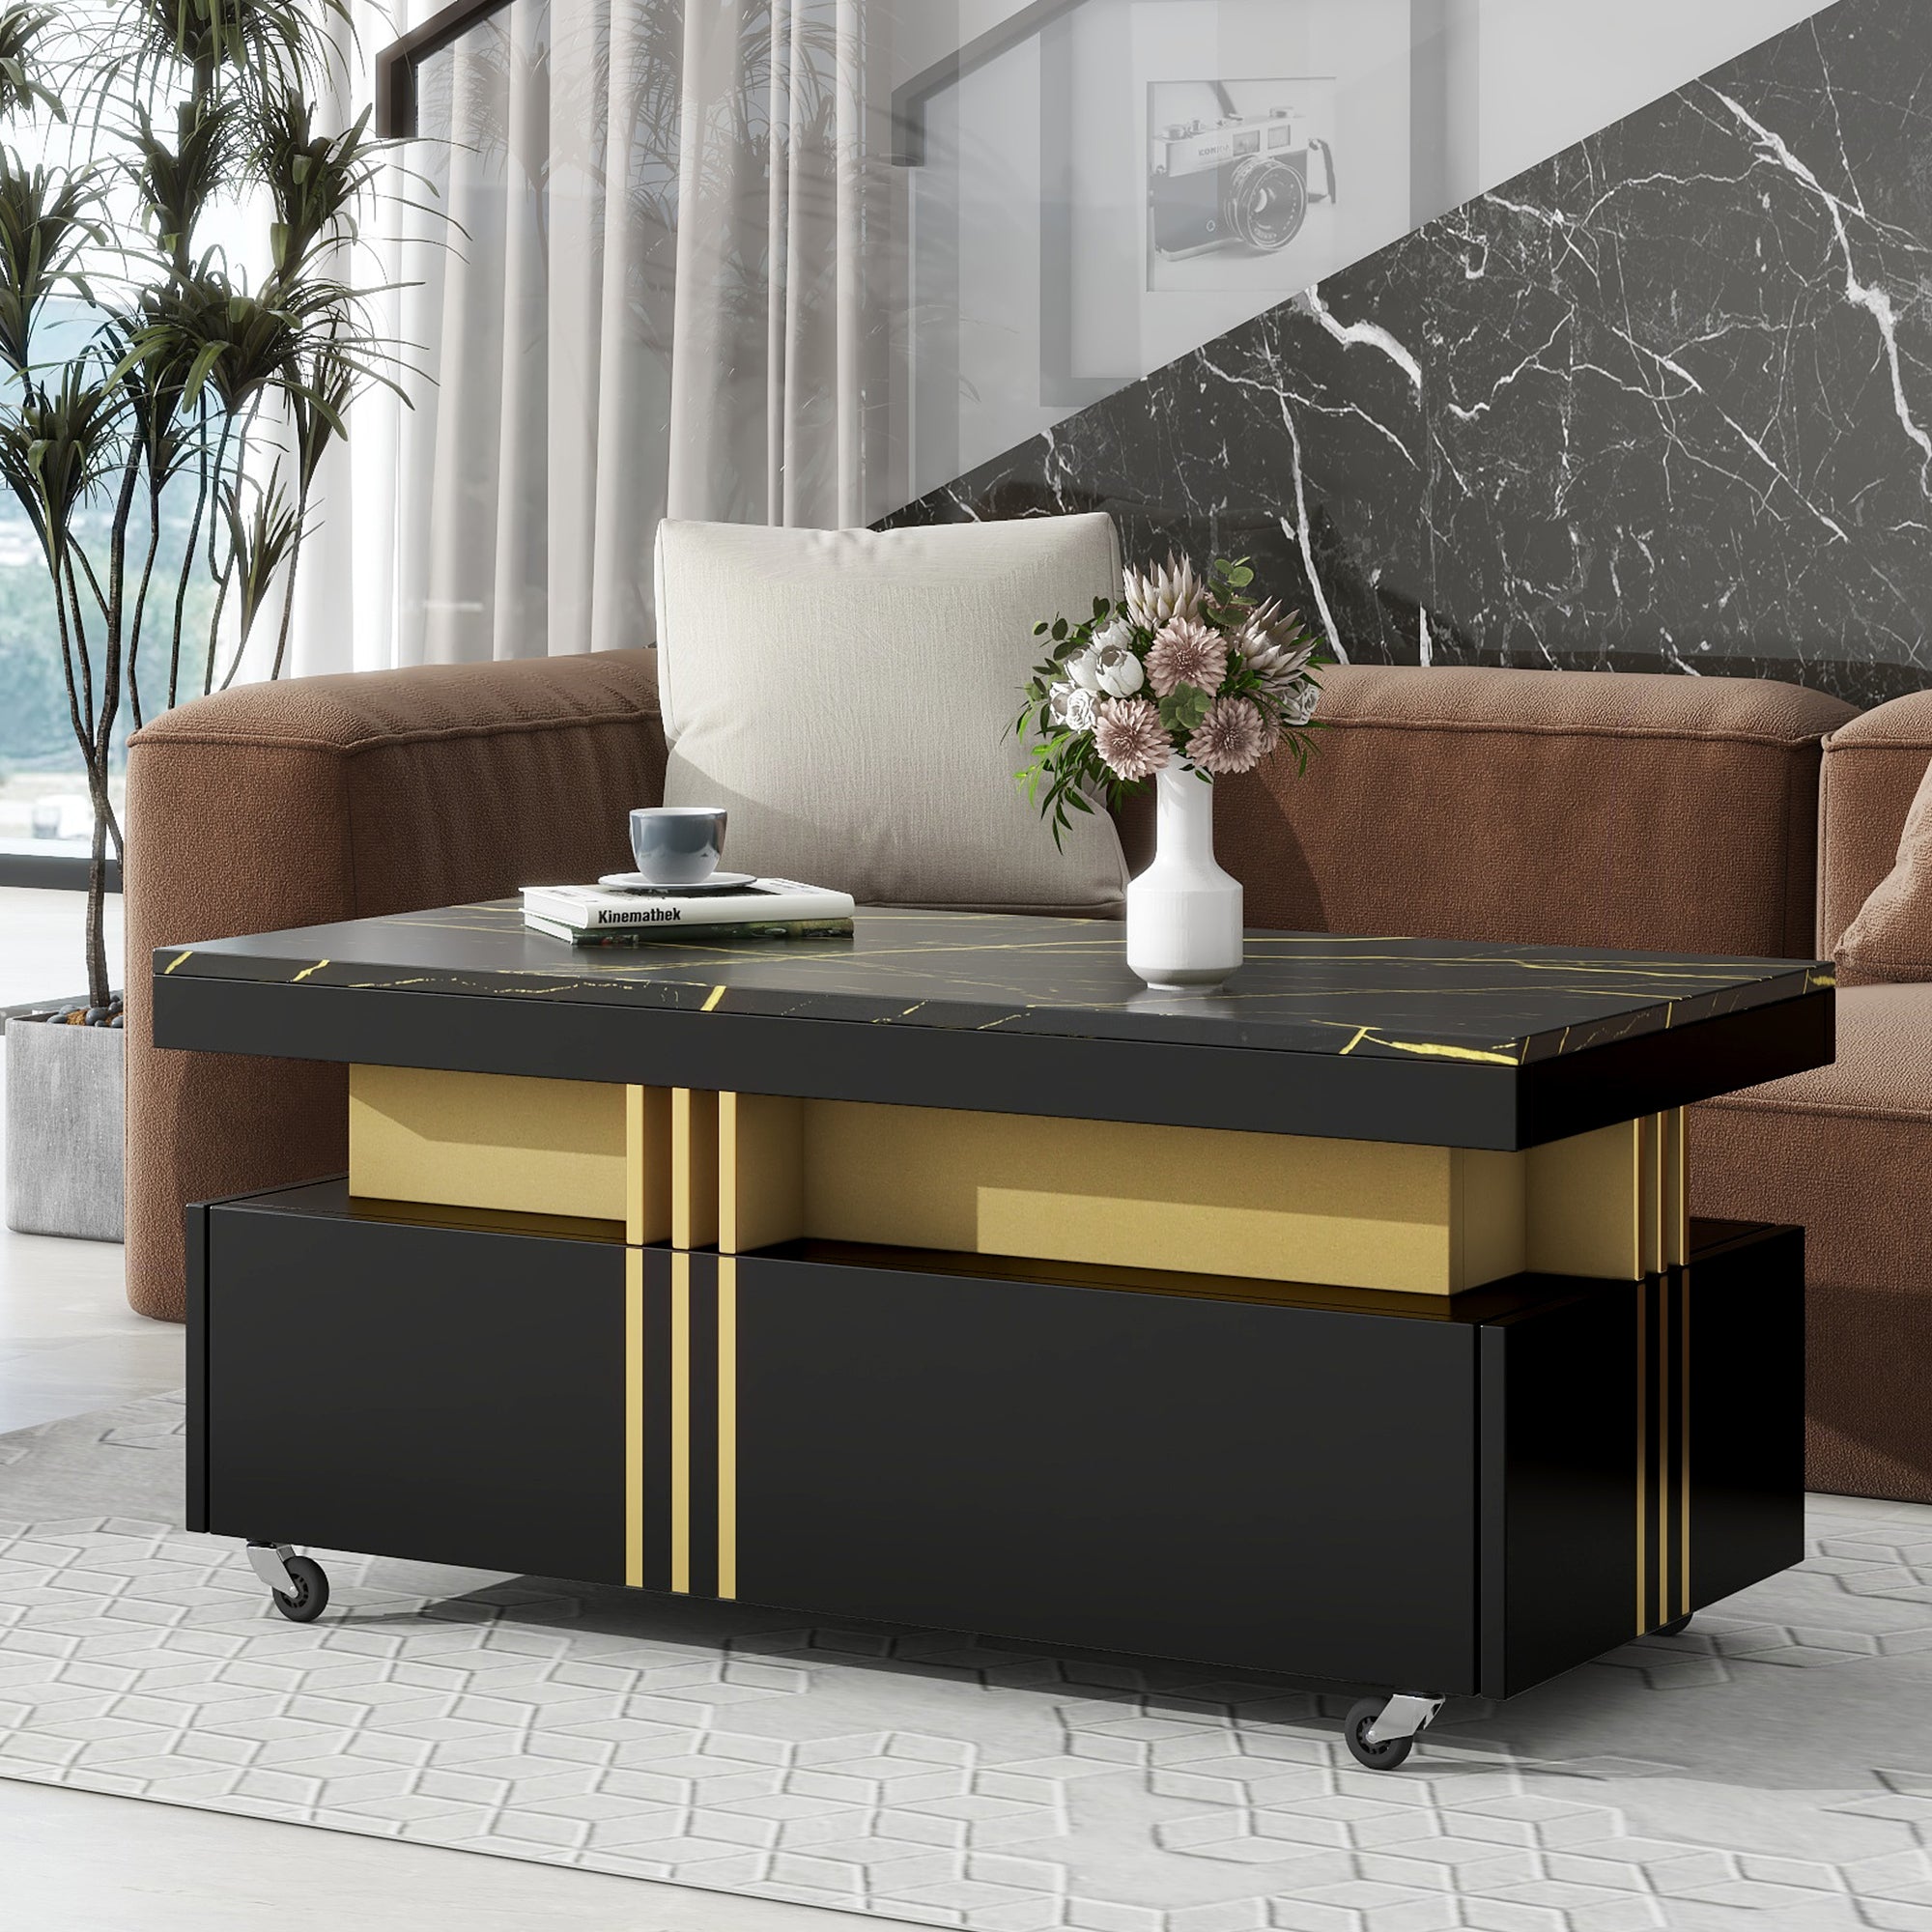 ON TREND Contemporary Coffee Table with Faux Marble